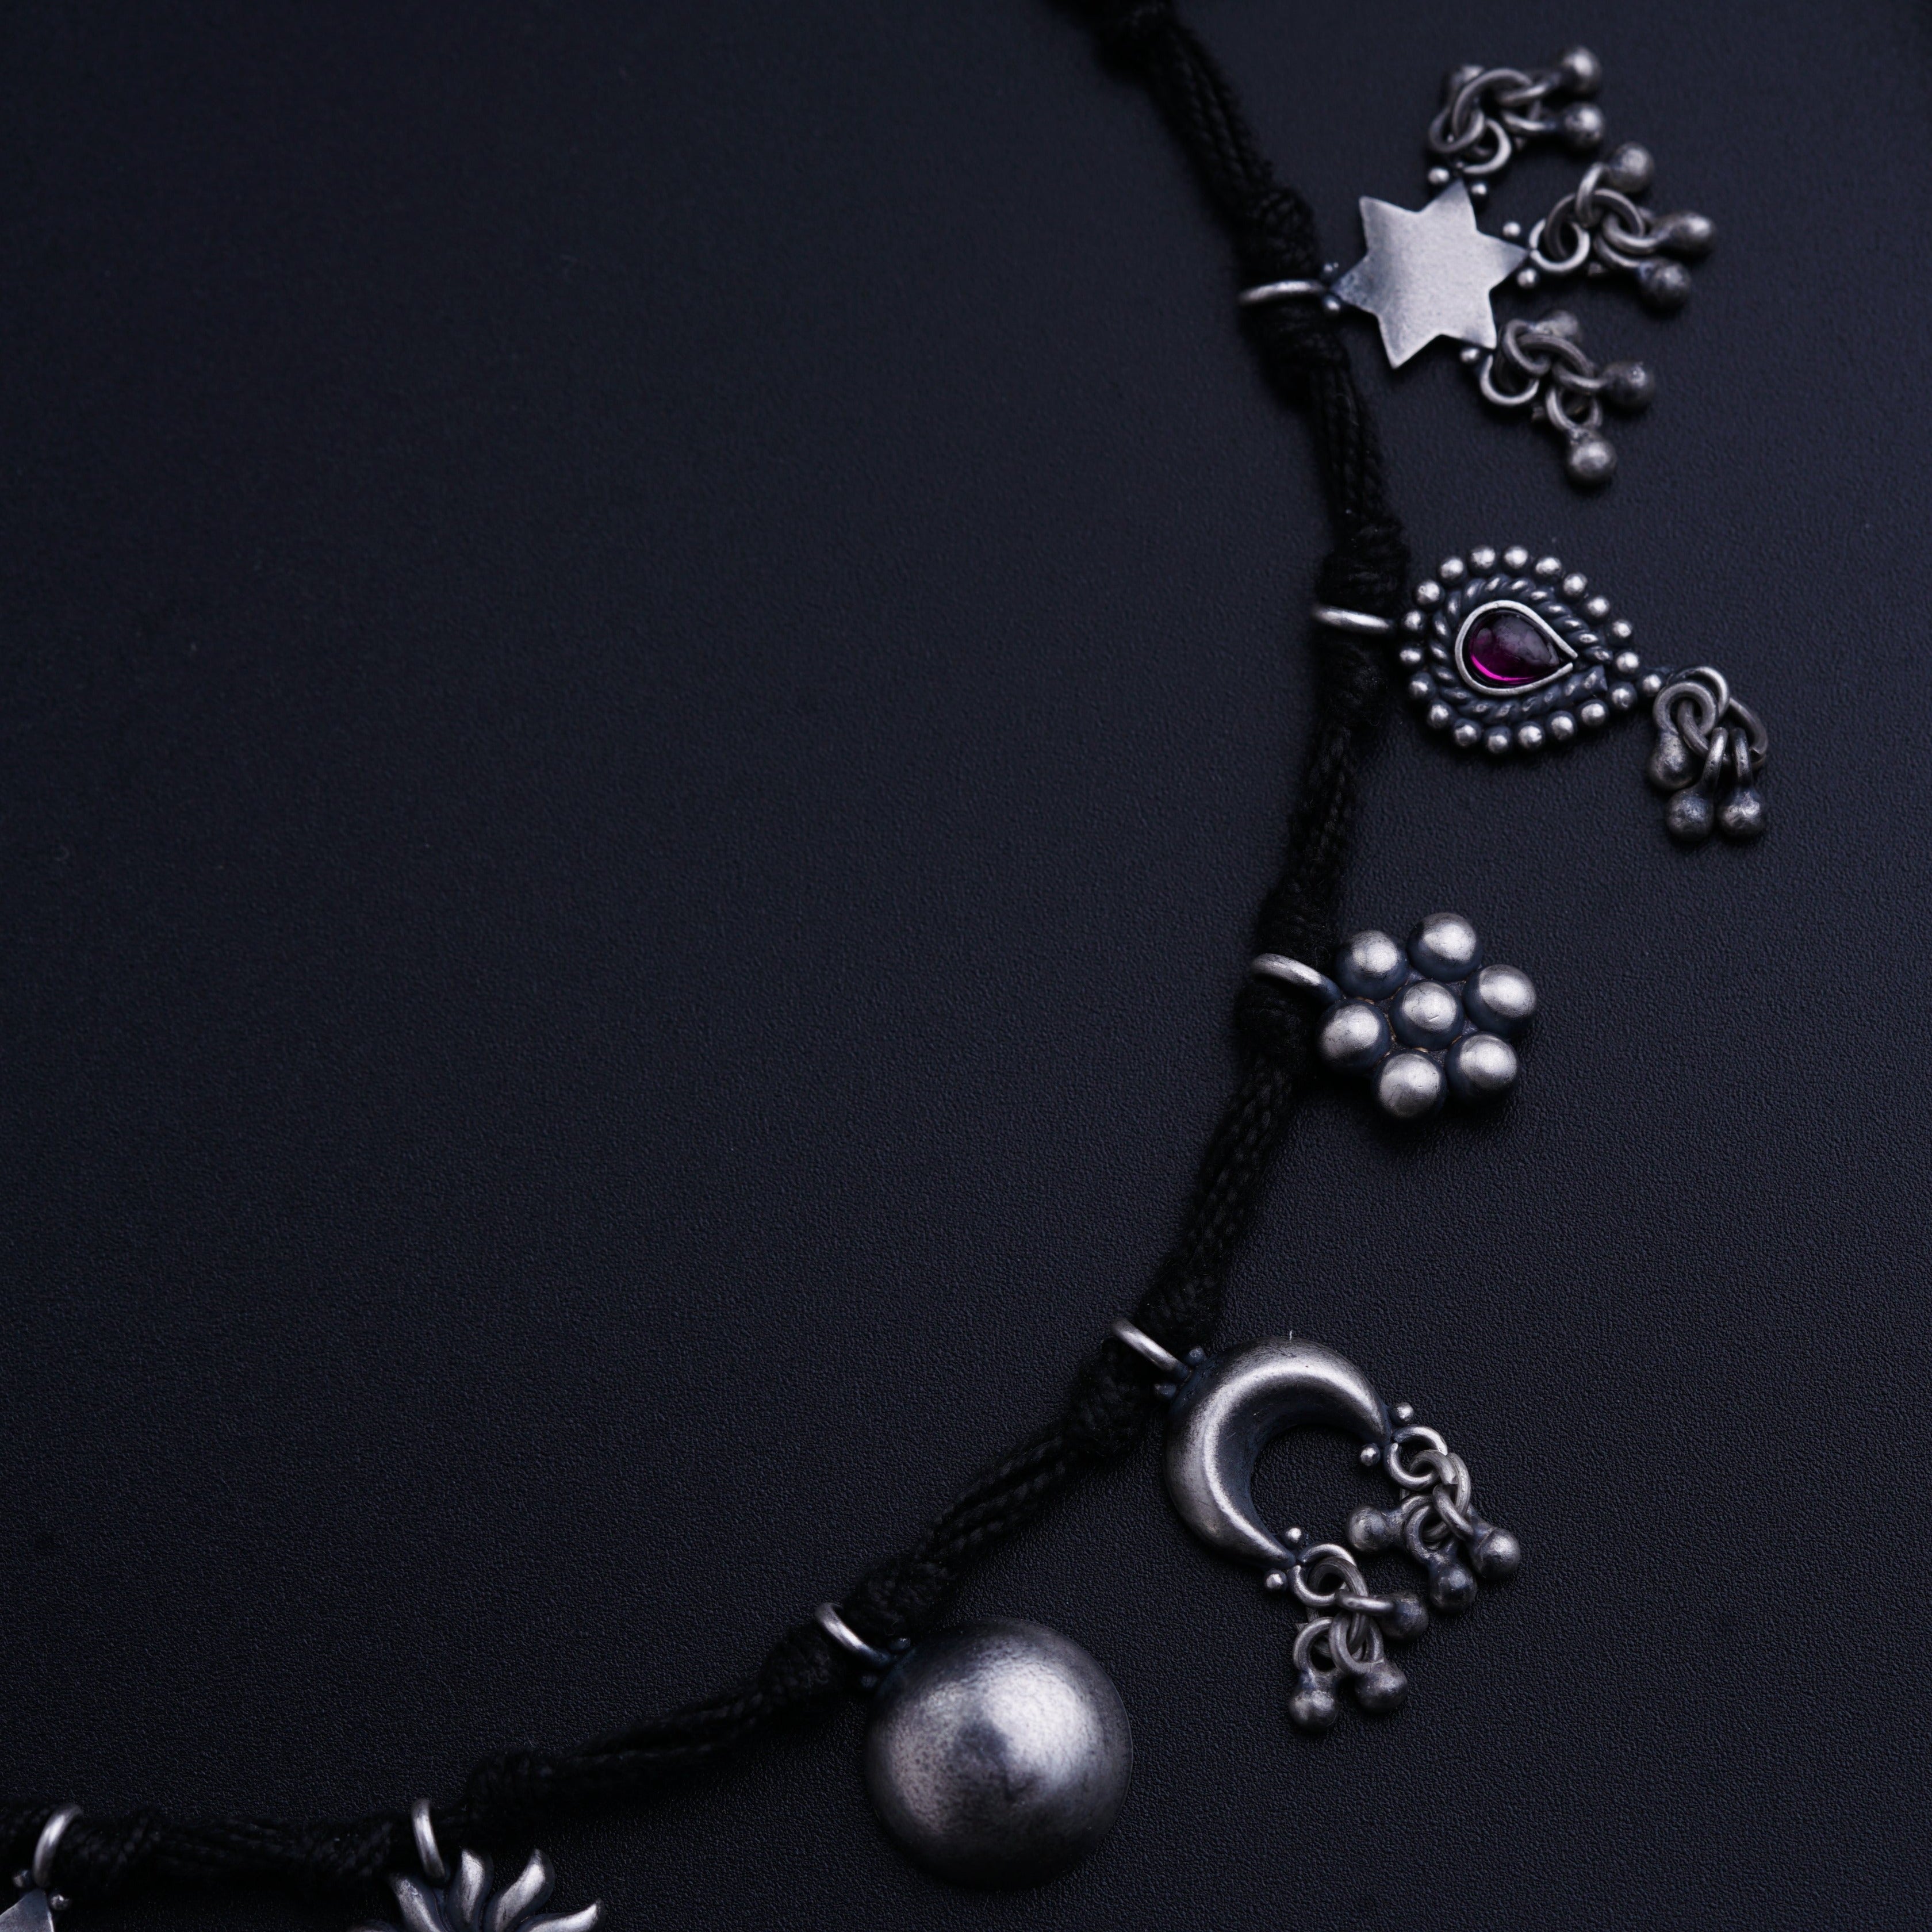 a close up of a necklace on a black surface